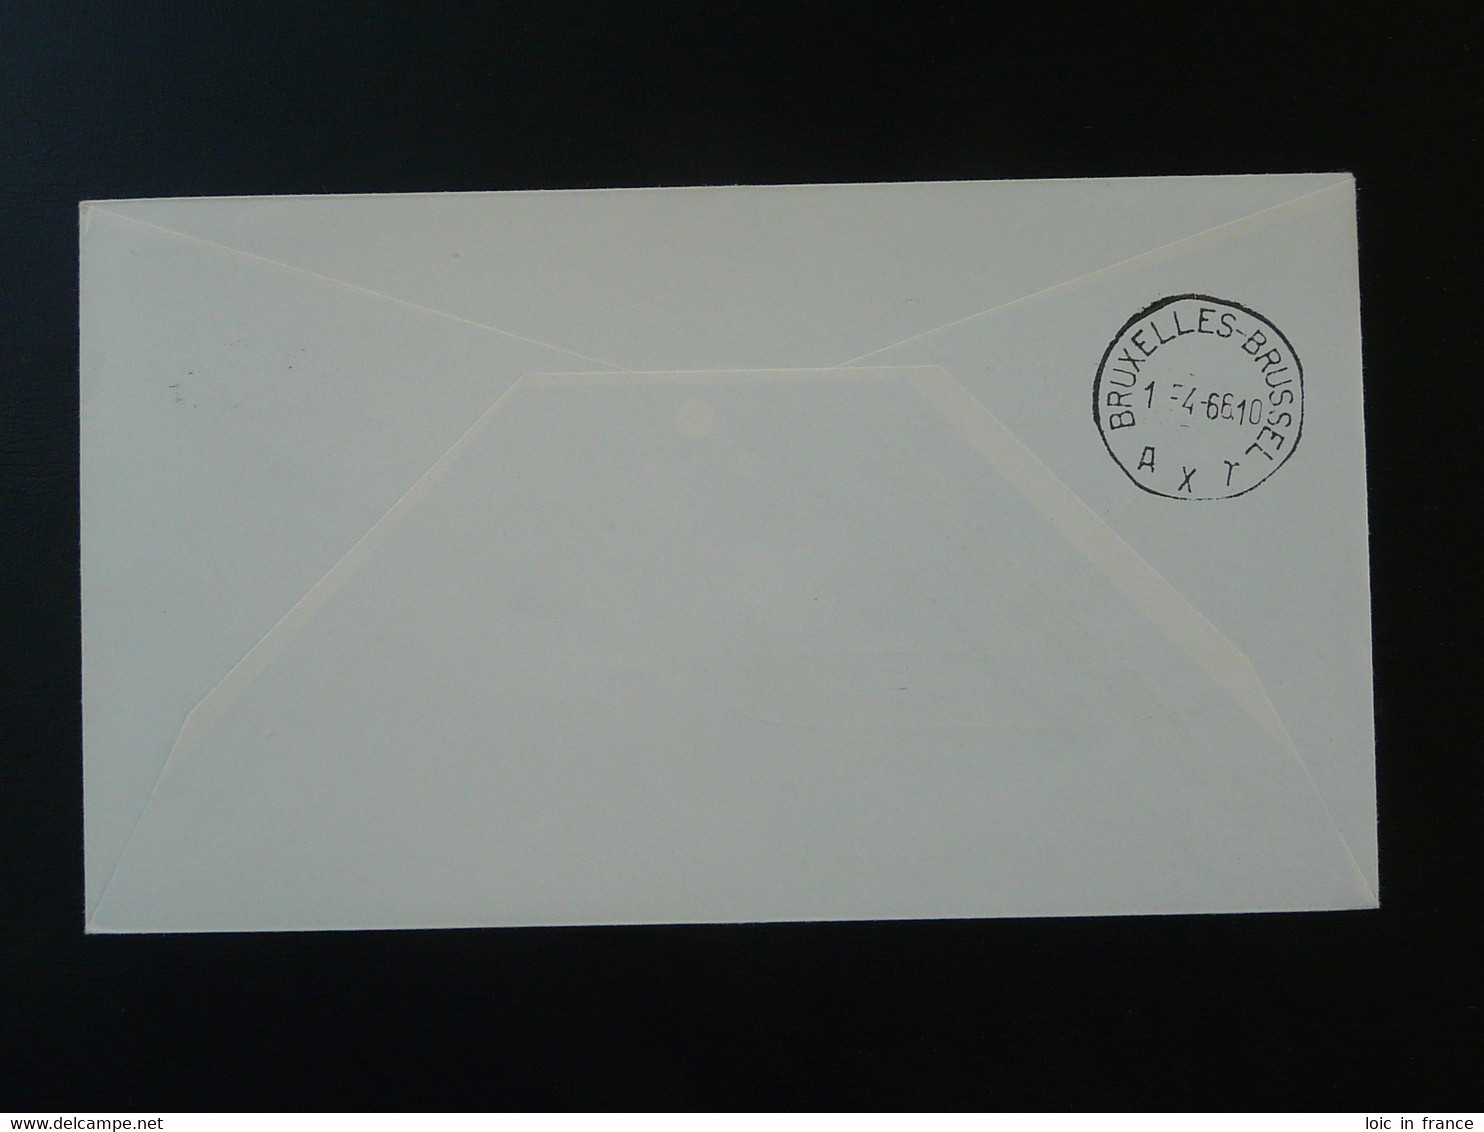 Lettre Premier Vol First Flight Cover Luxembourg Bruxelles Luxair 1966 - Briefe U. Dokumente